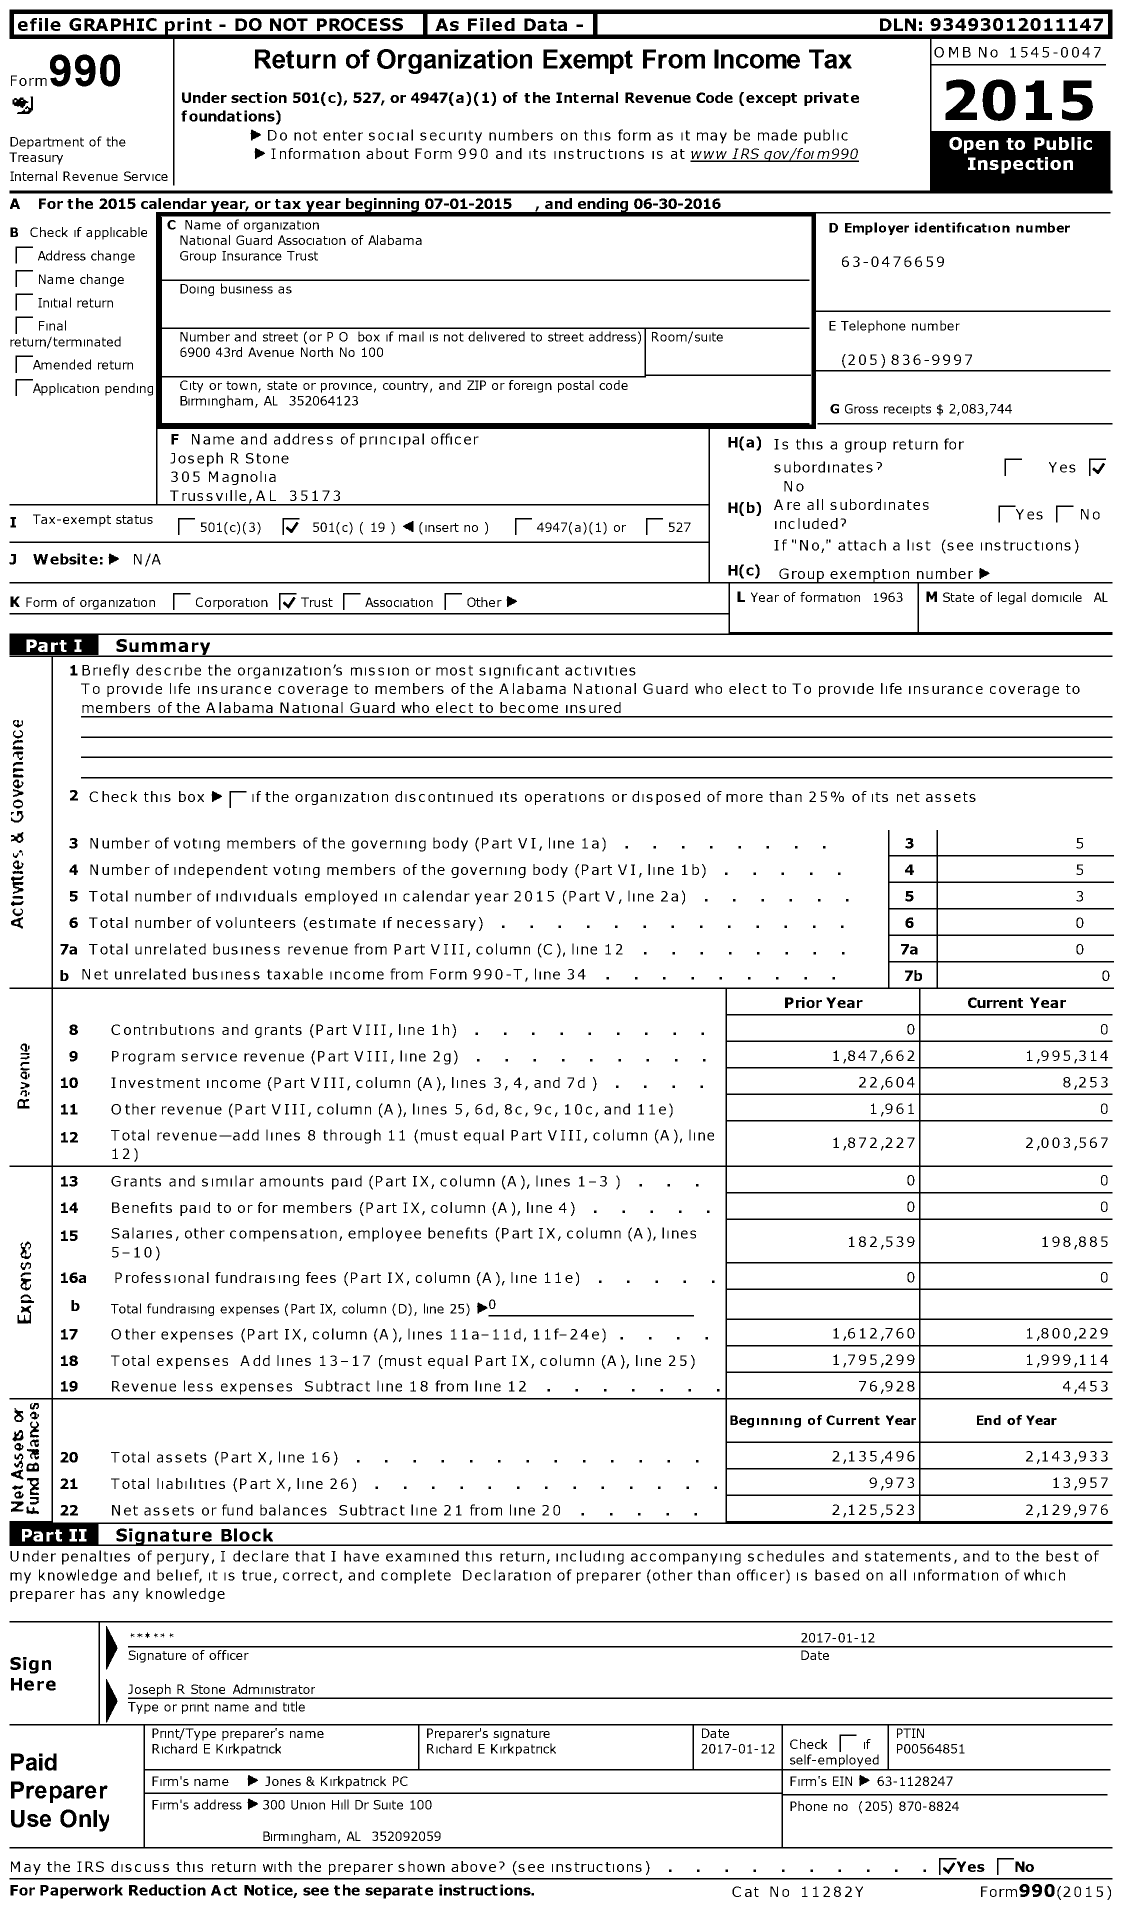 Image of first page of 2015 Form 990O for National Guard Association of Alabama Group Insurance Trust